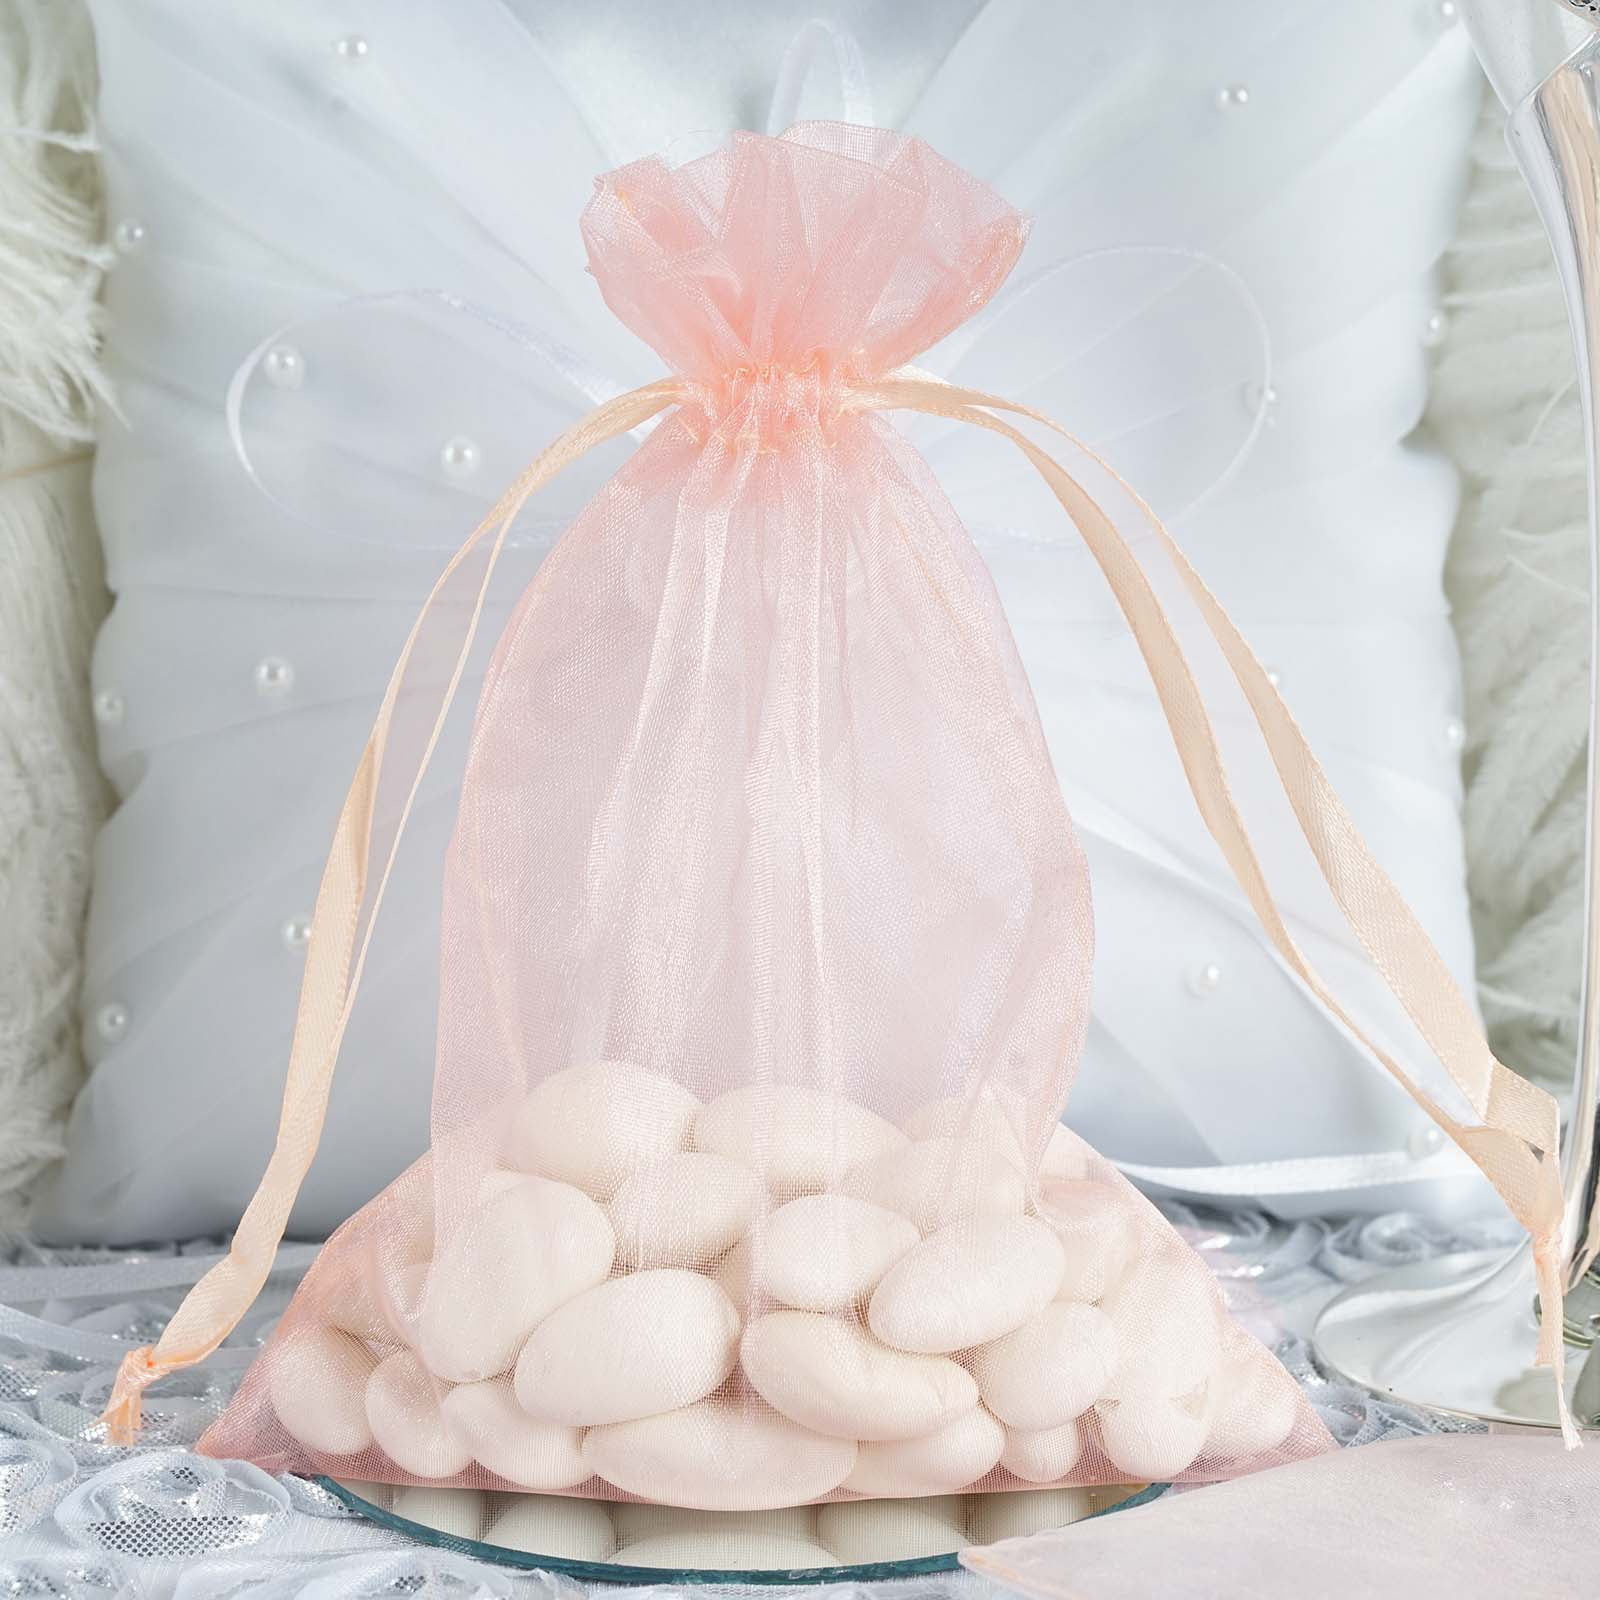 10 pcs 5x7" Champagne ORGANZA FAVOR BAGS Wedding Party Reception Gift Favors